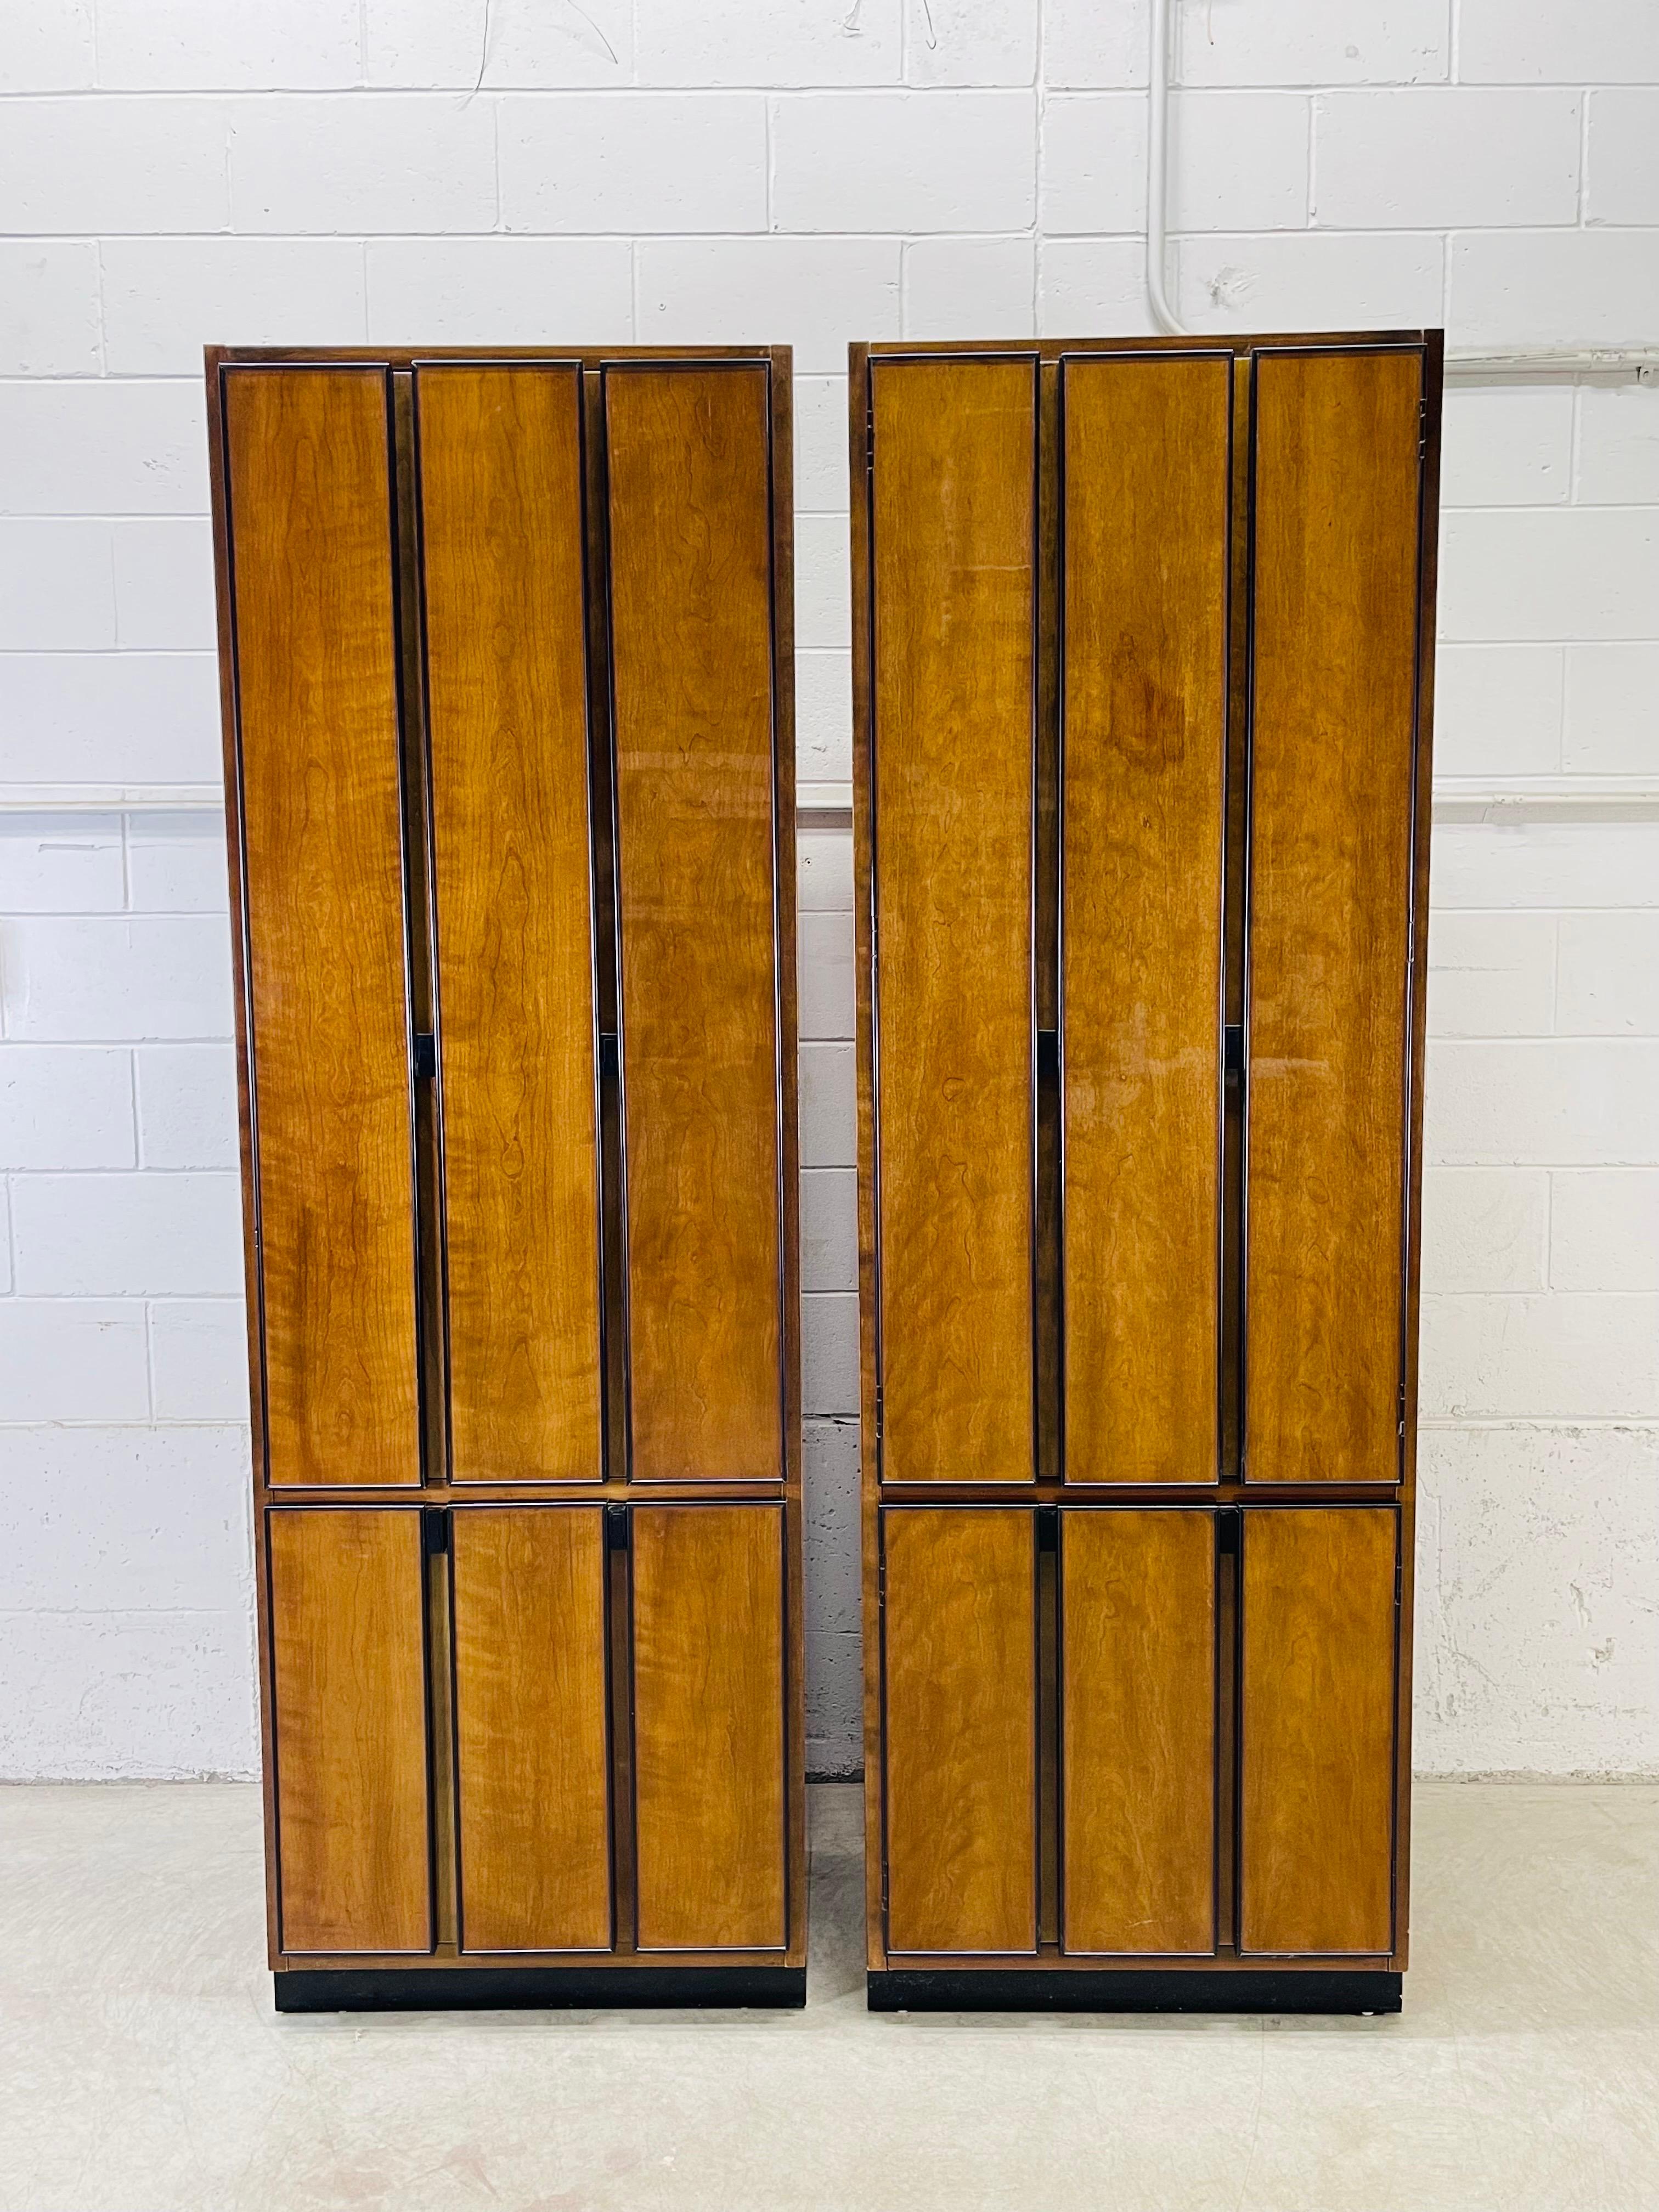 Vintage Henredon Furniture pair of tall mahogany bedroom armoires from the “Circa 1990” collection. Each armoire has three drawers, adjustable shelving and hardware for a hanger rod. You can configure the interior any way you prefer. The armoire is